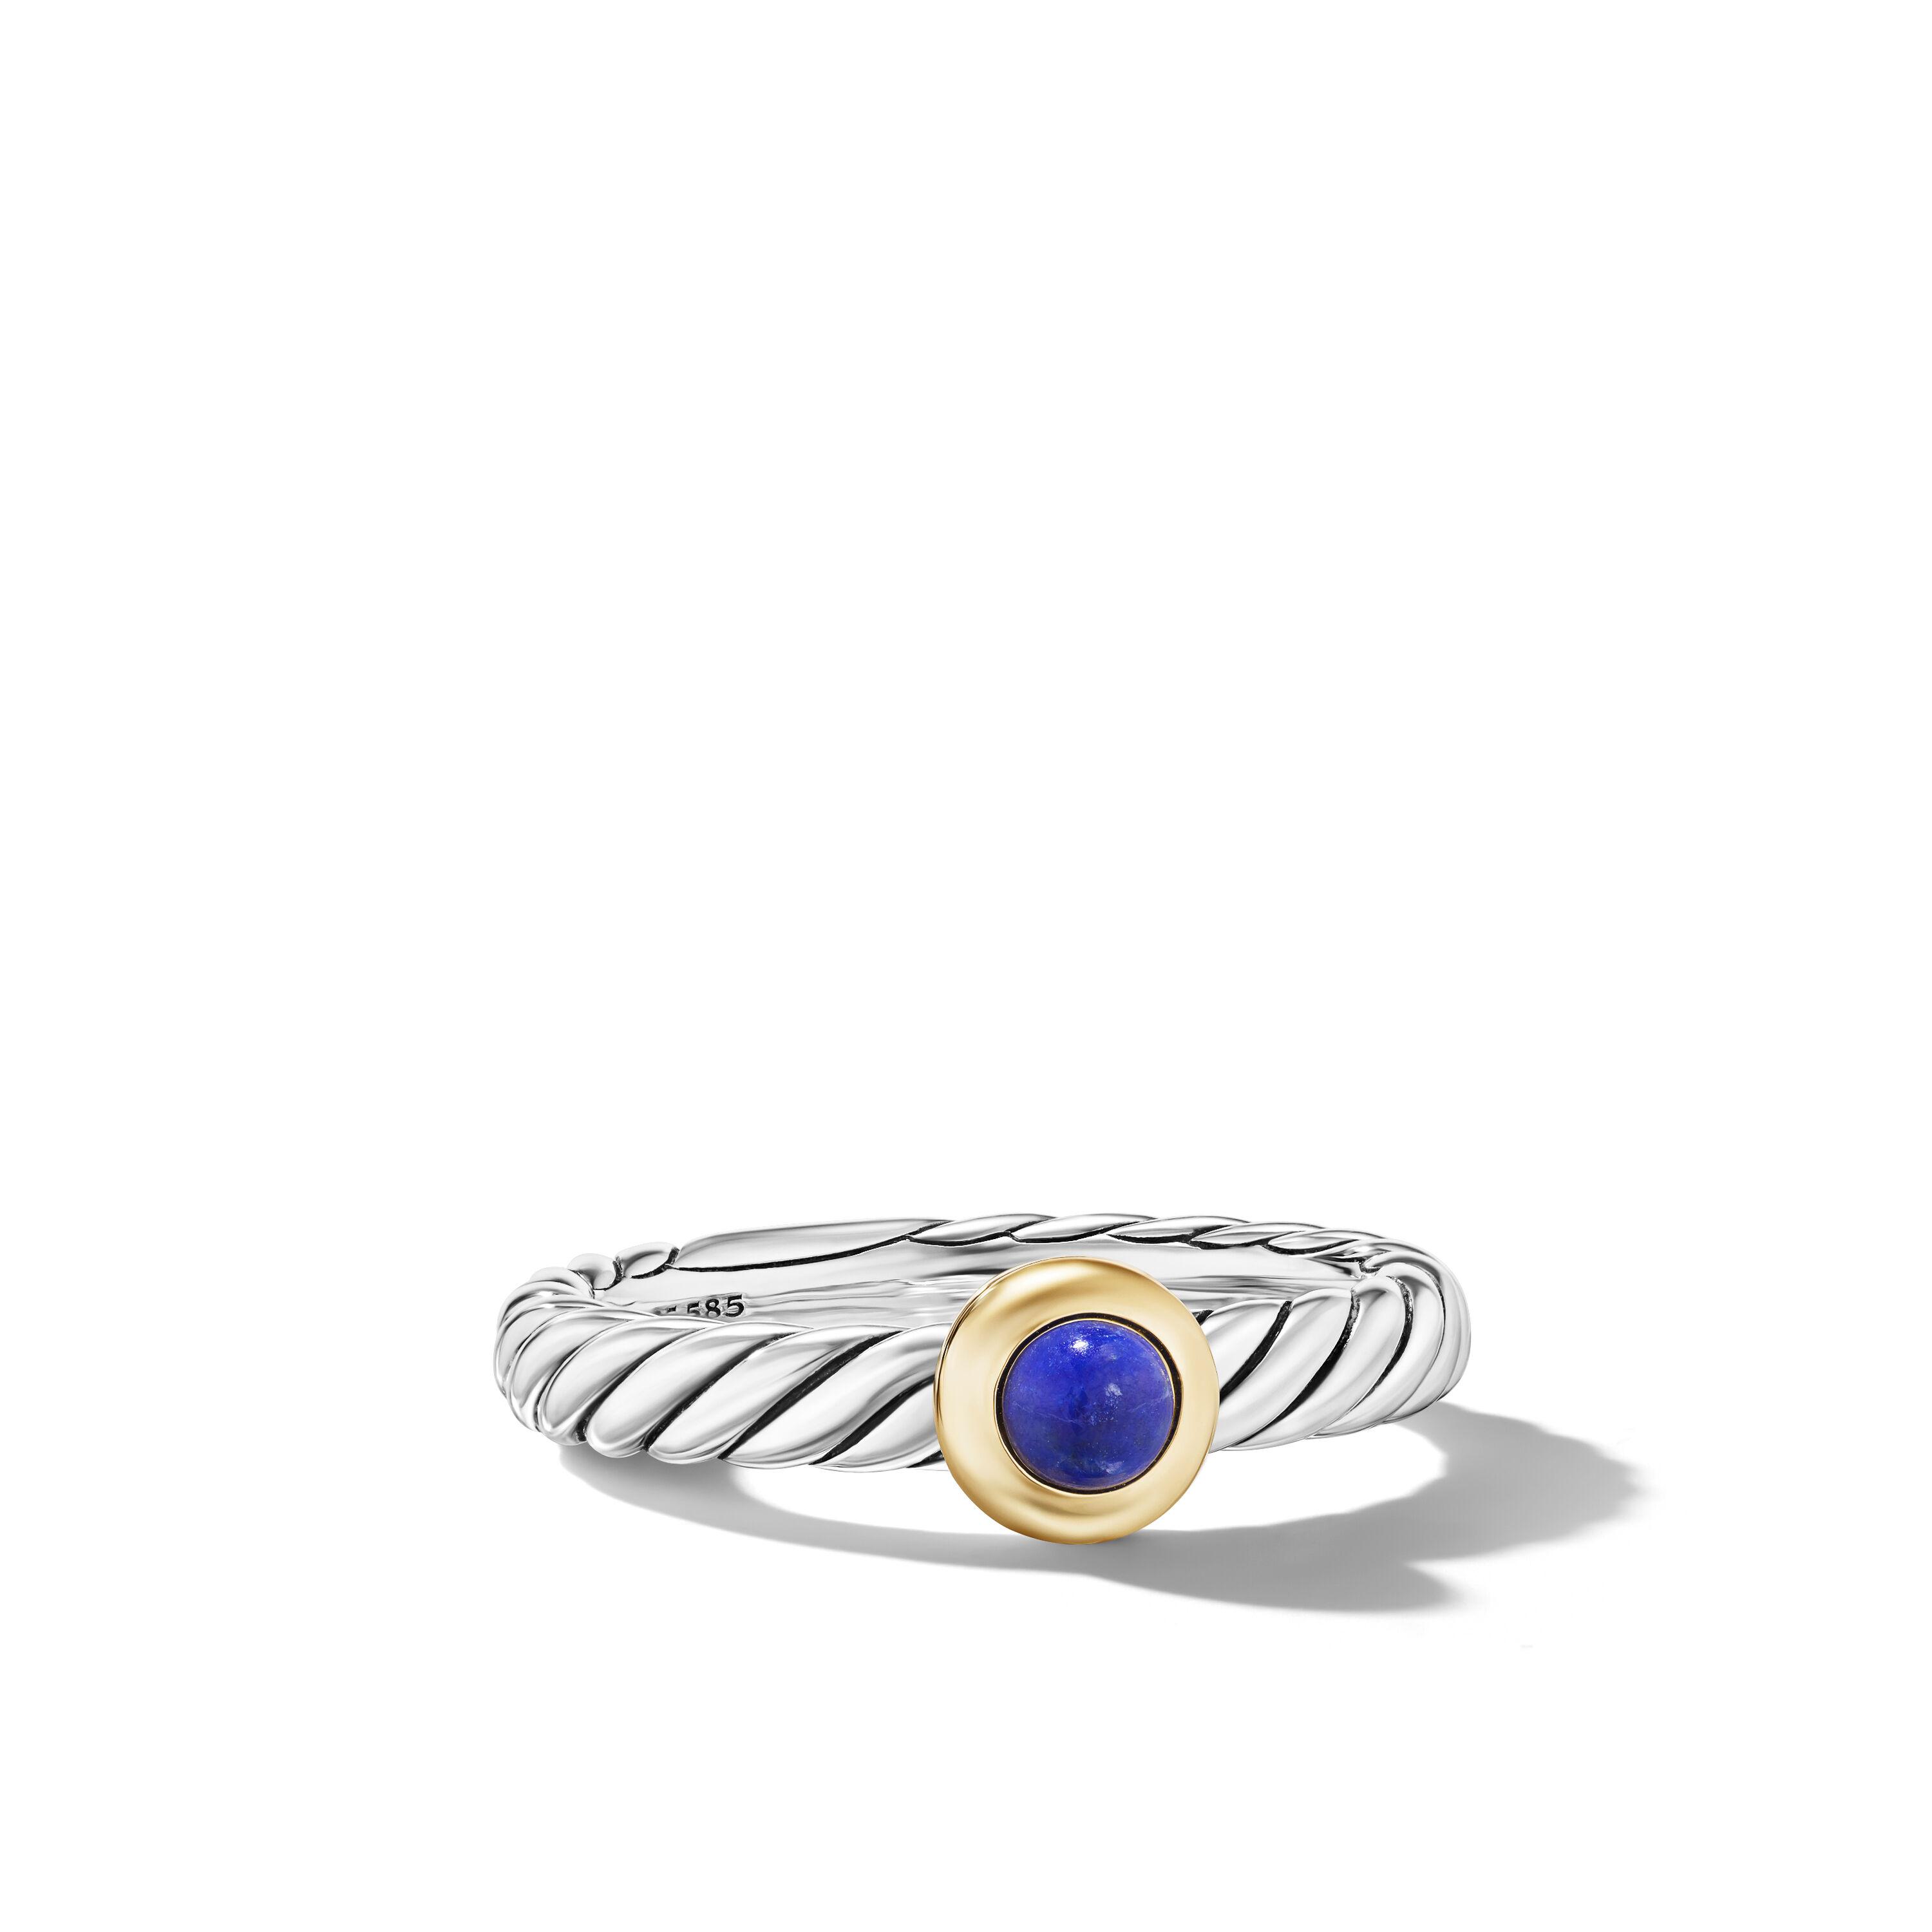 David Yurman Petite Cable Ring in Sterling Silver with 14K Yellow Gold and Lapis, Size 6 0